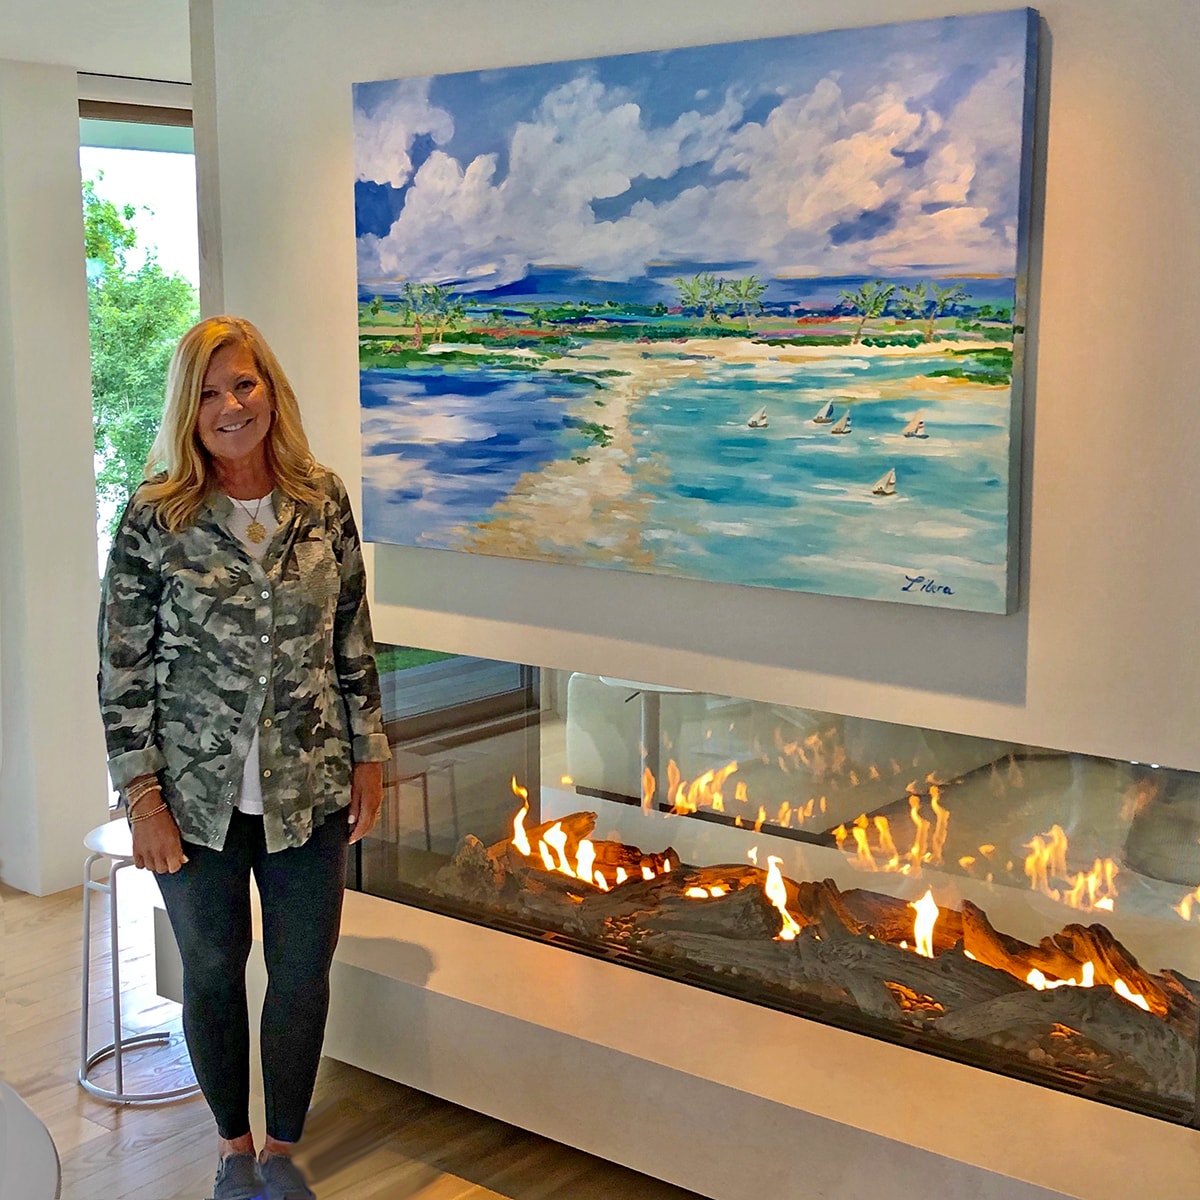 Heidi Libera with painting over fireplace